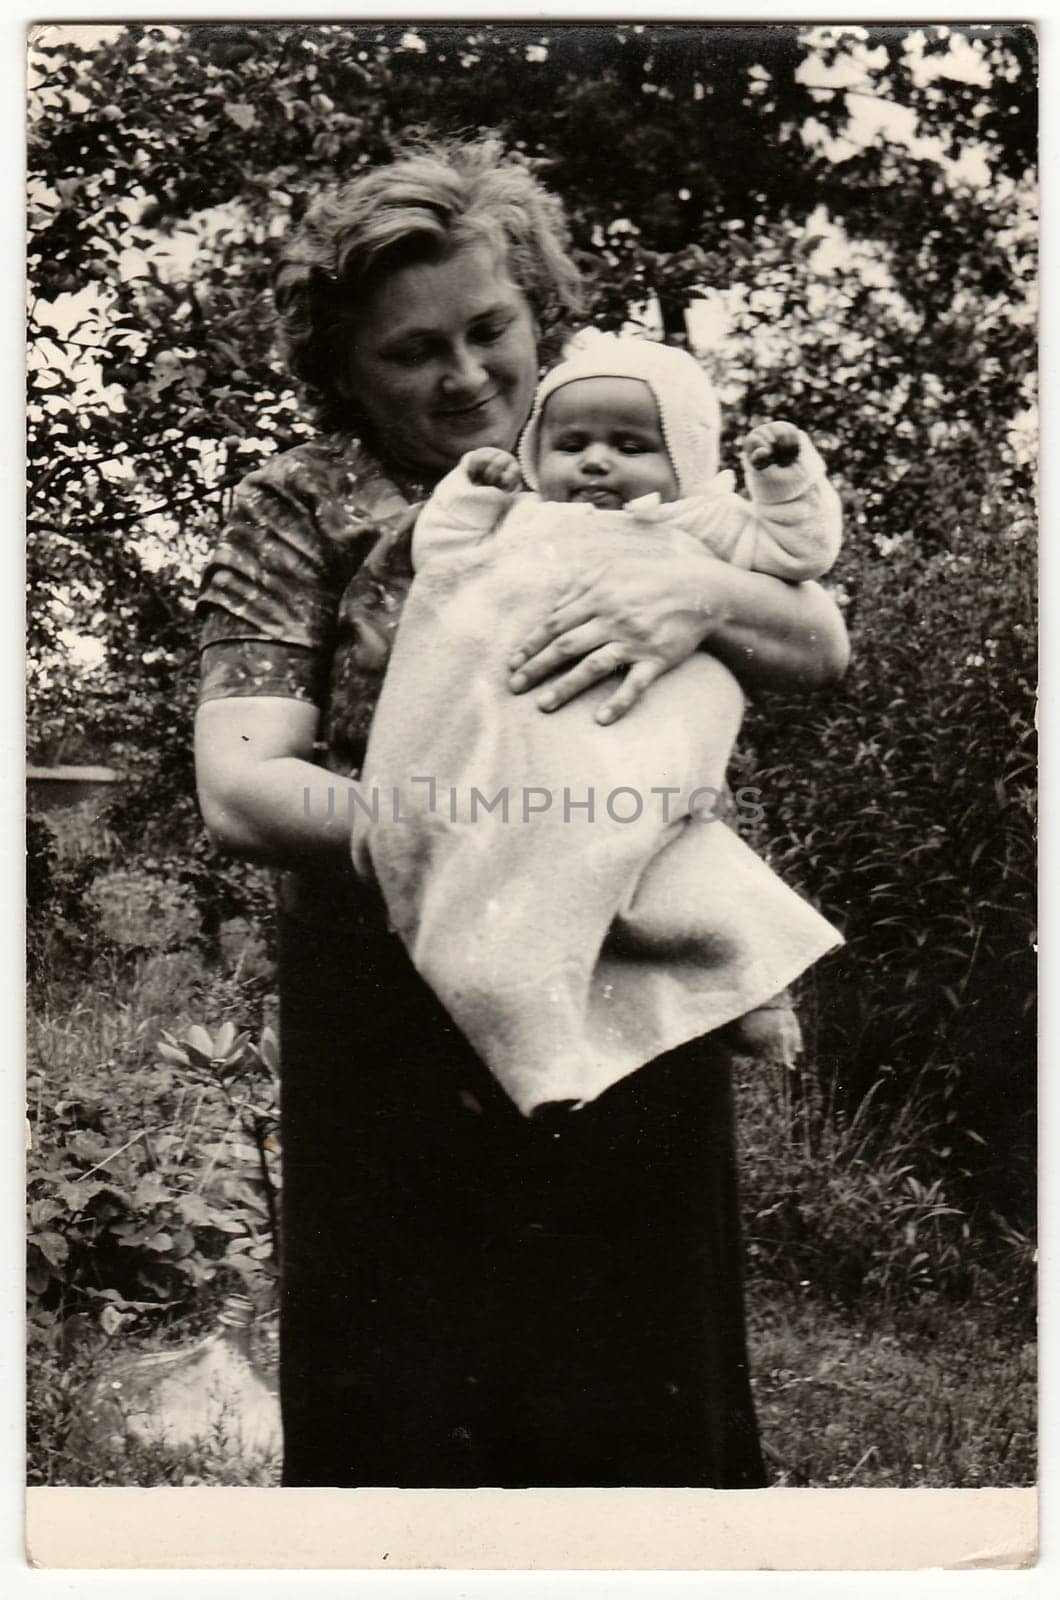 Vintage photo shows young woman cradles baby. by roman_nerud